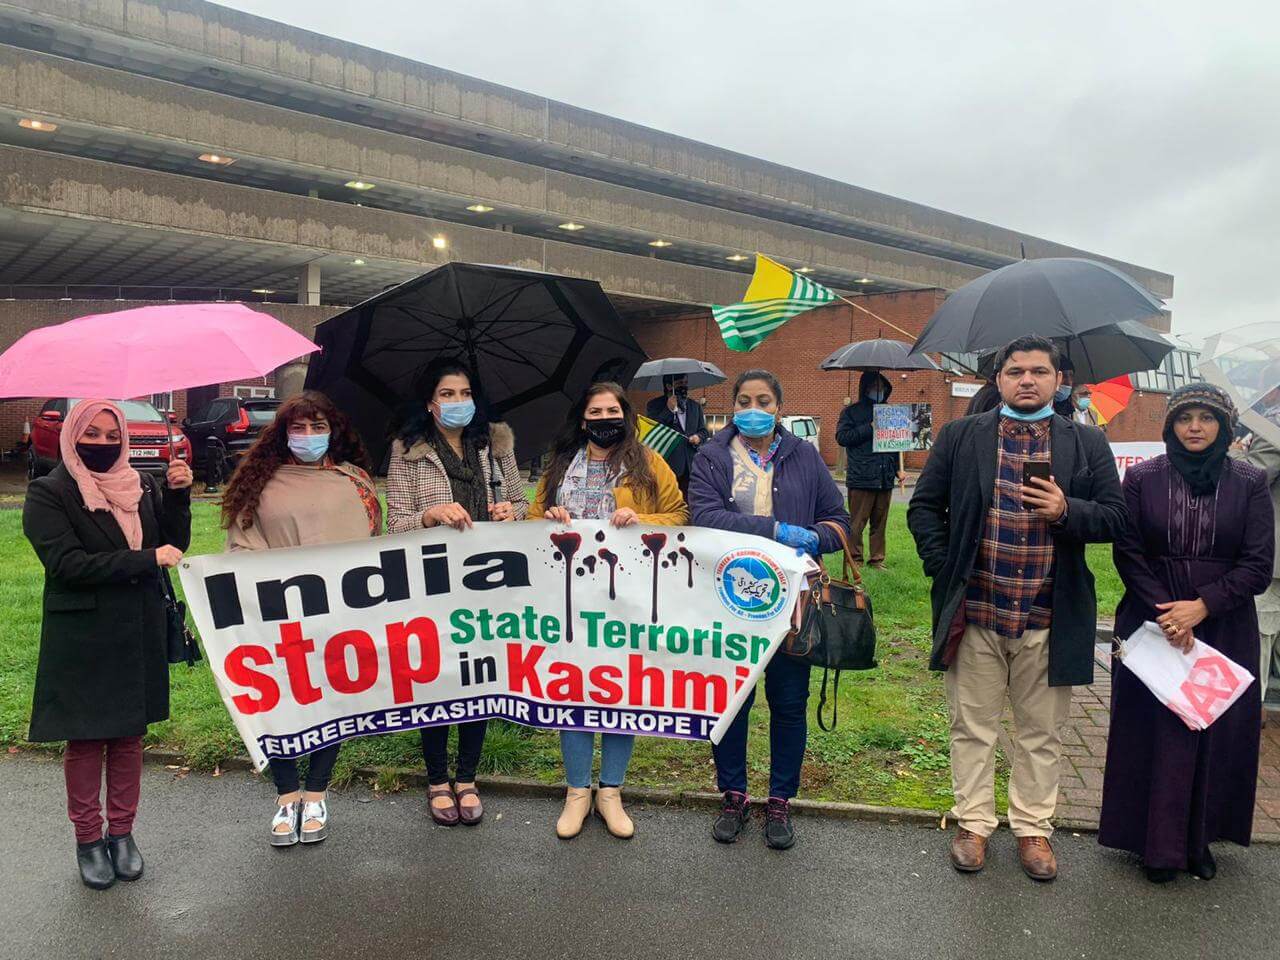 Kashmir Martyrs’ Day protests took place across the UK